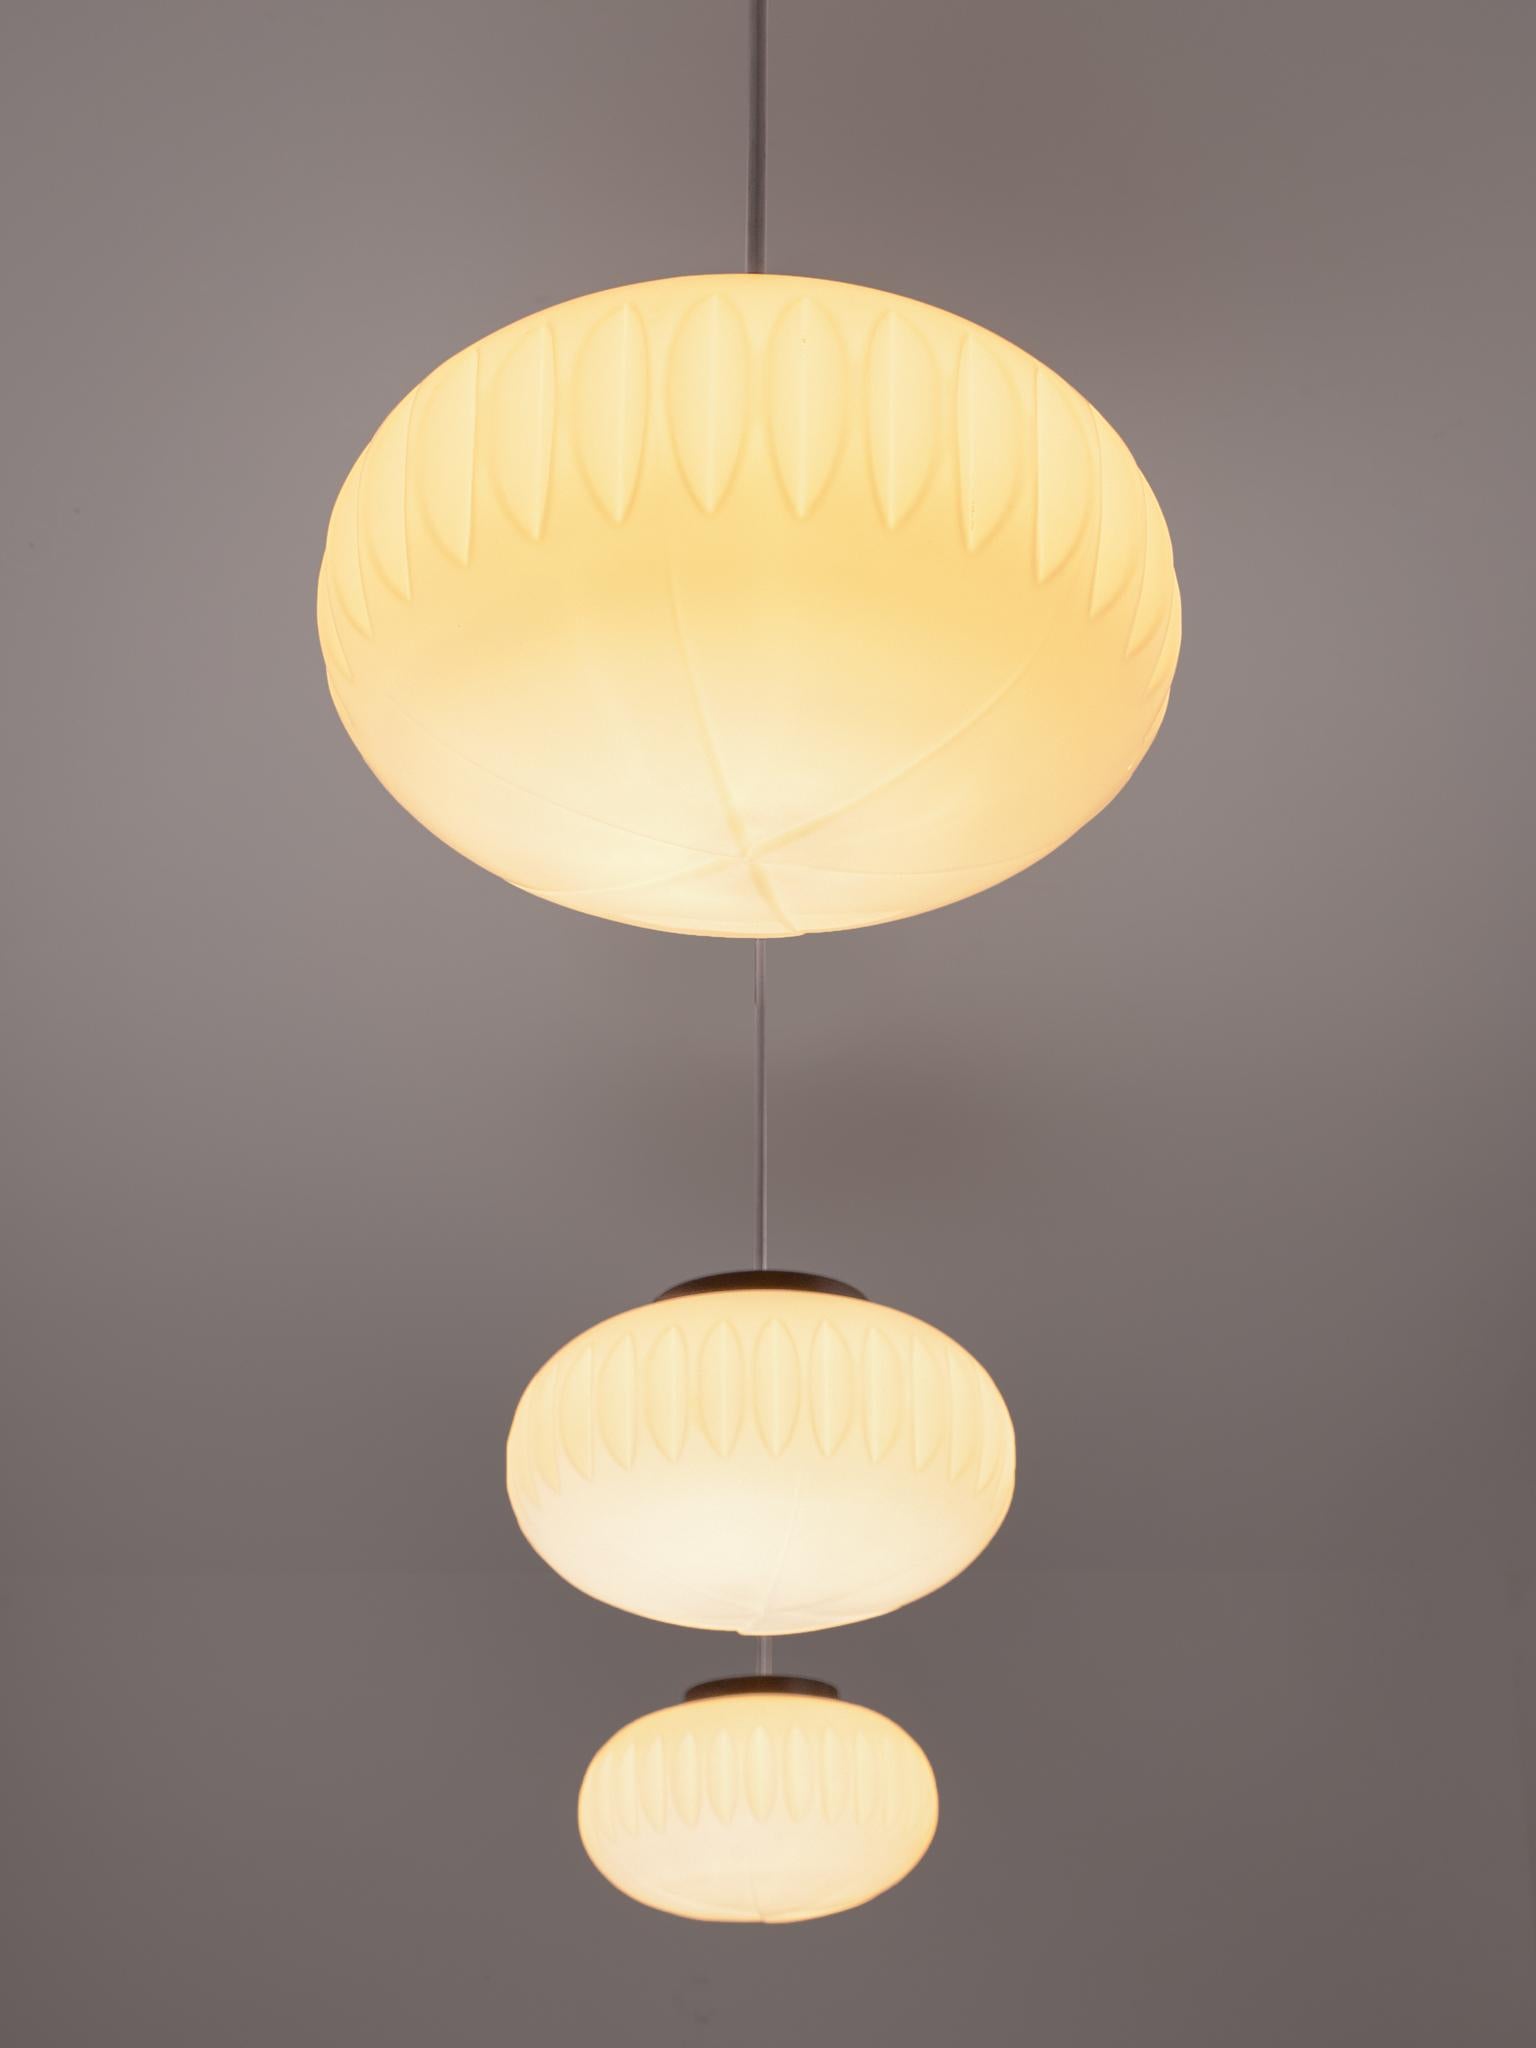 Late 20th Century Set of Three Opaline Glass Pendants with Structured Spheres